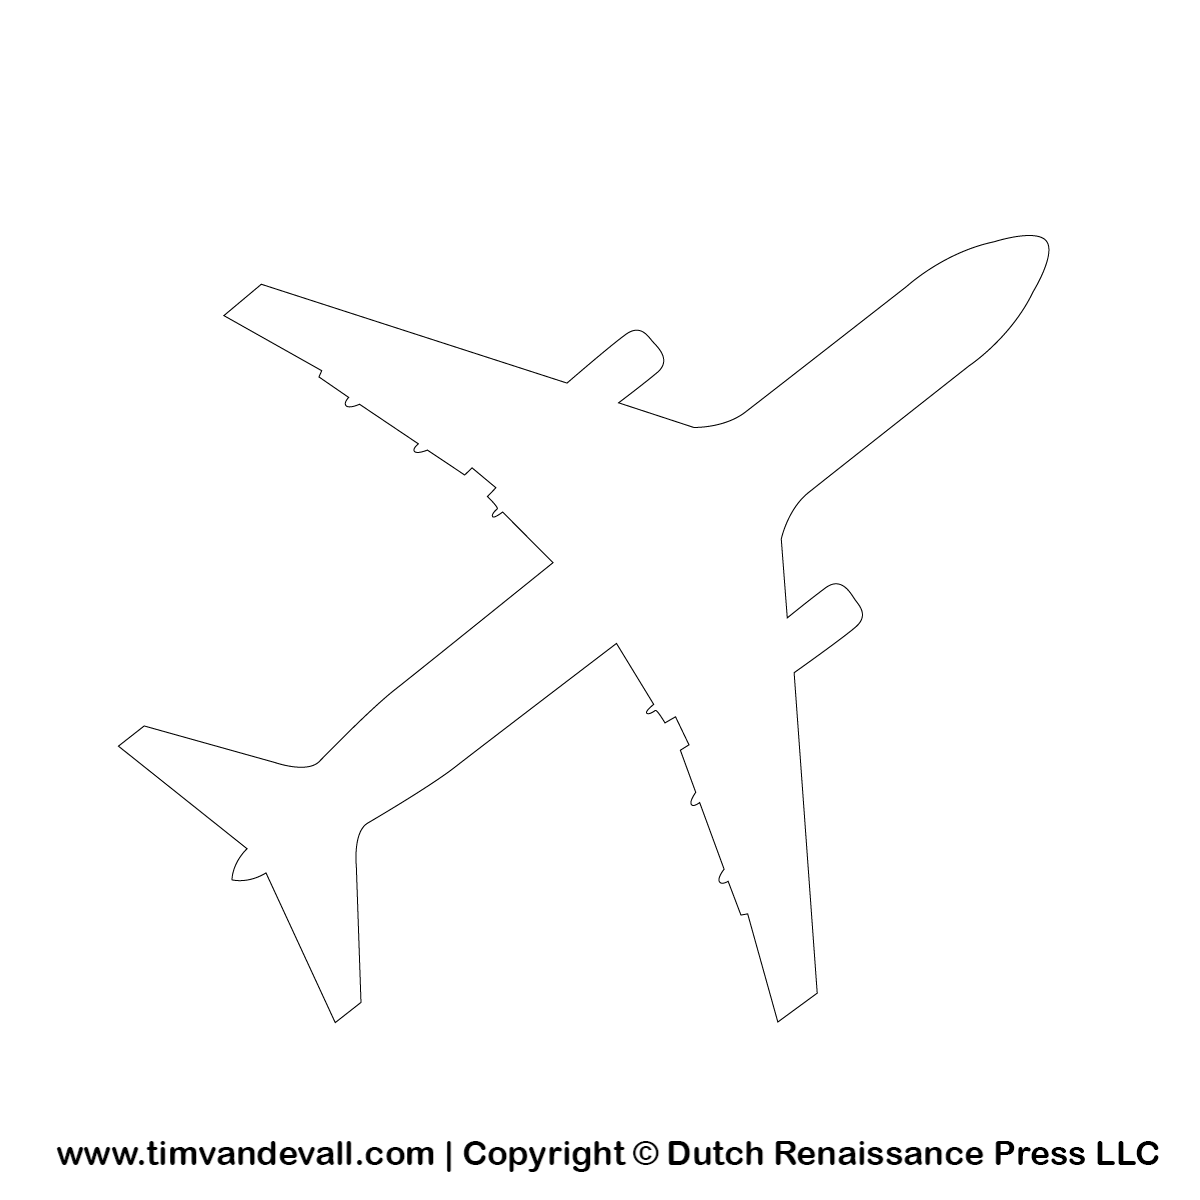 Free airplane silhouette stencil and outline clipart for artists